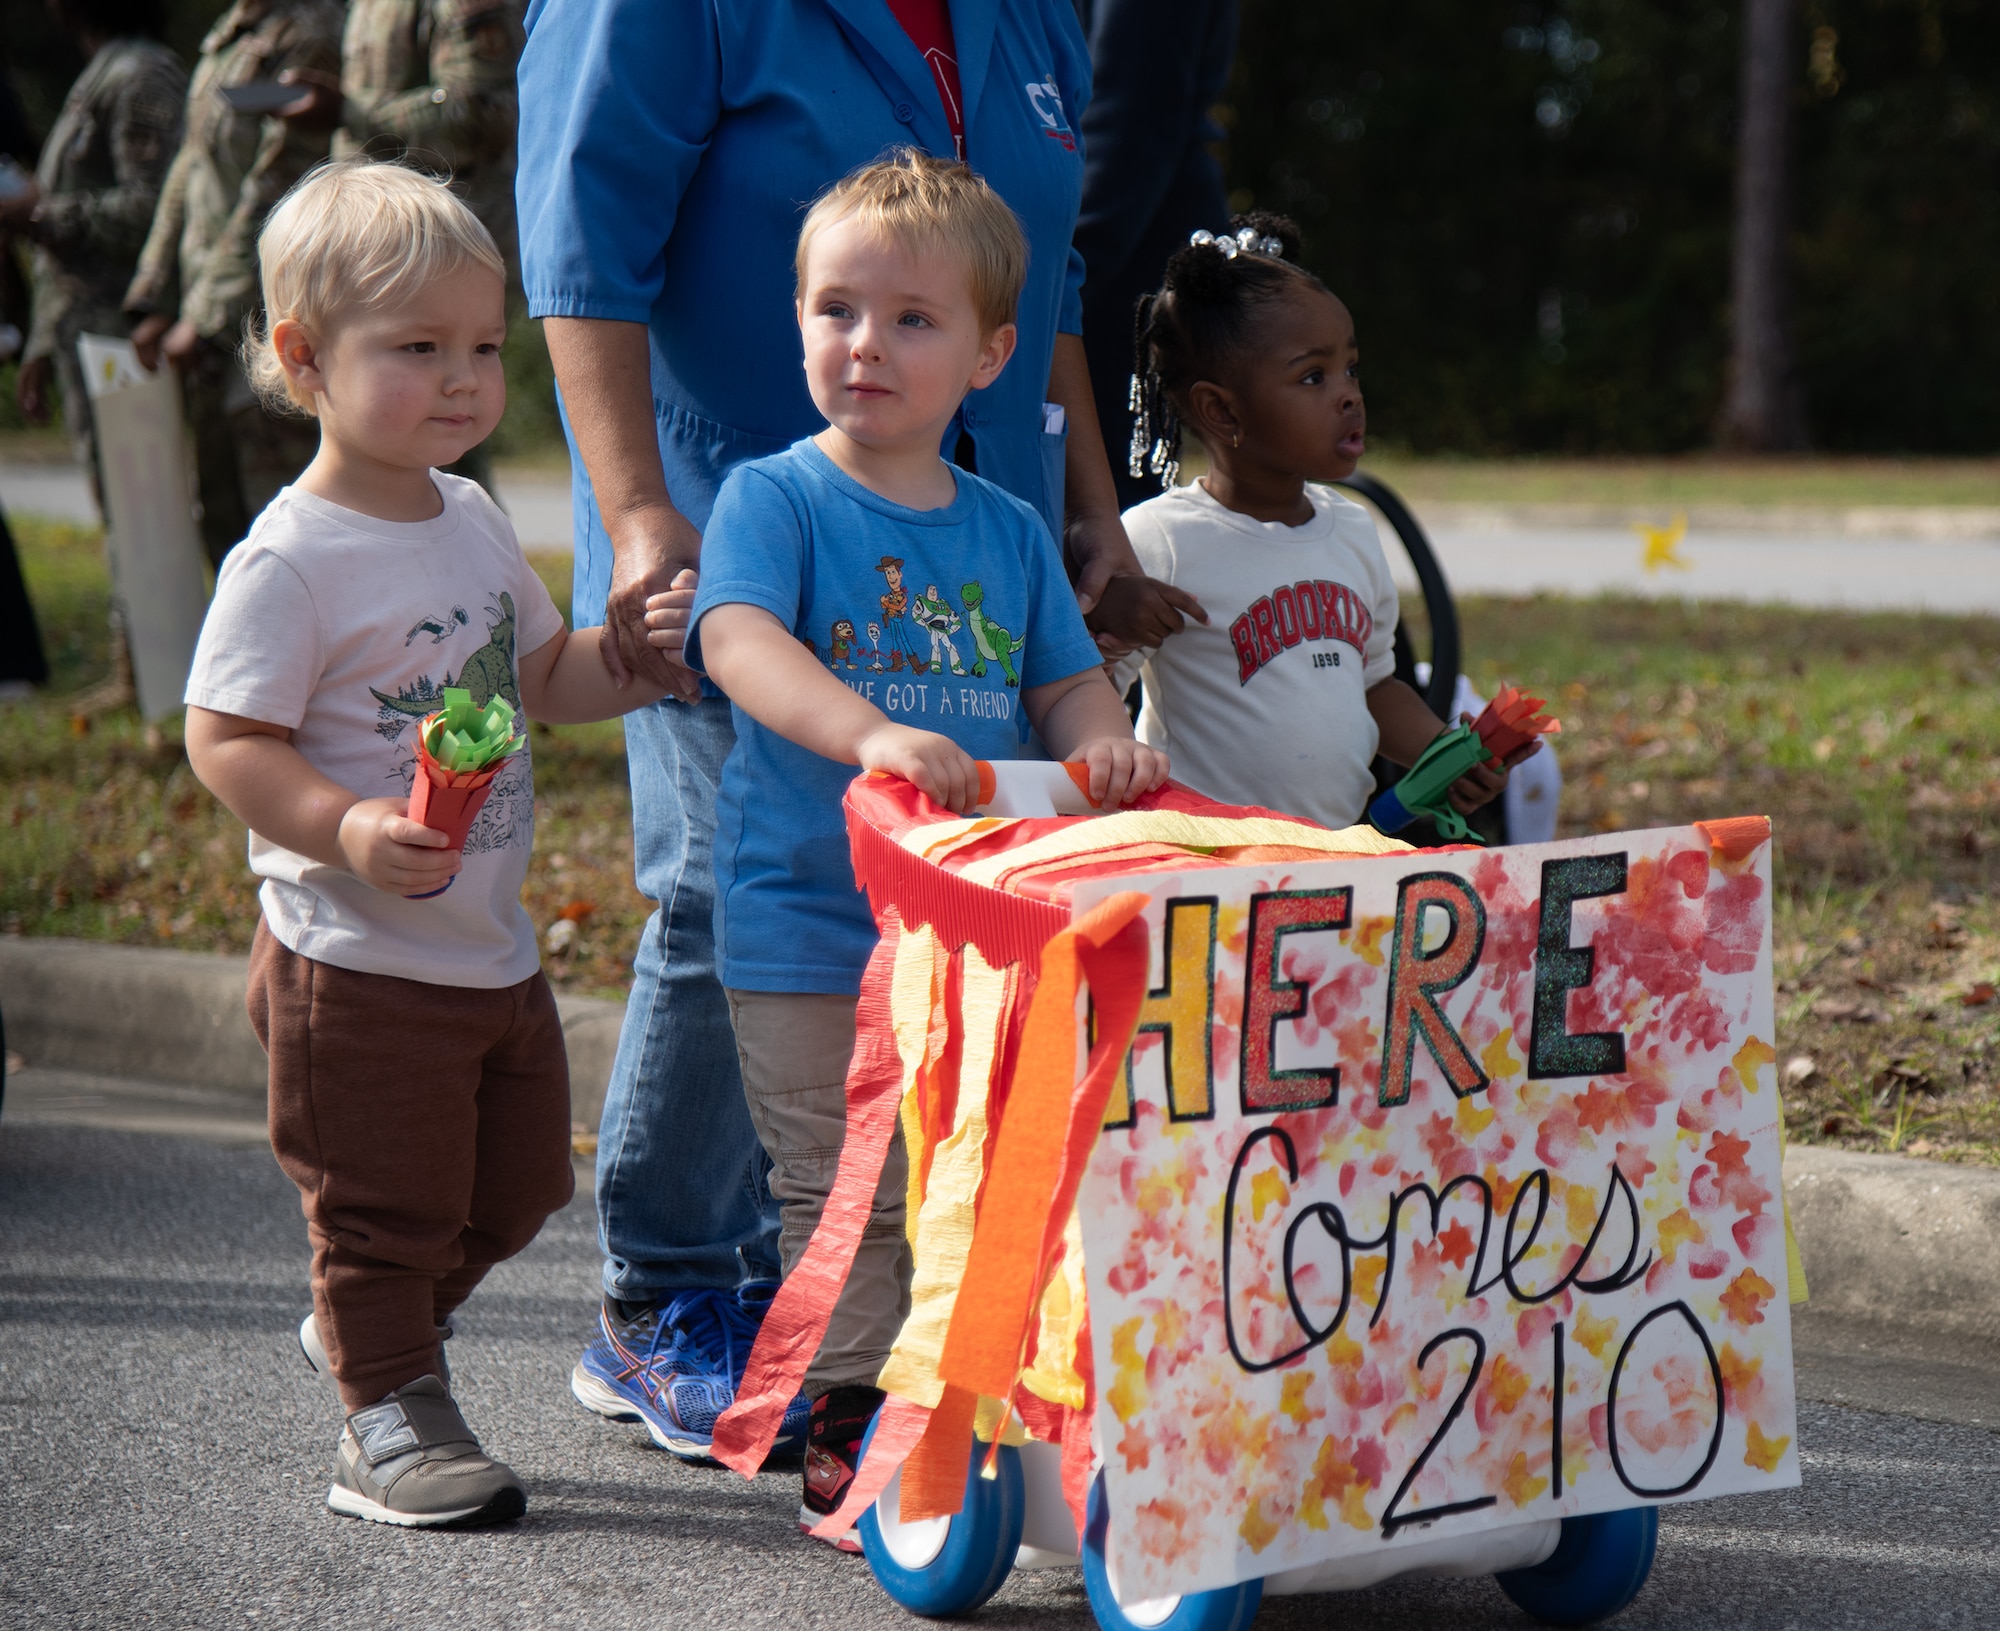 A group of toddlers walk by during a Child Development Center parade.